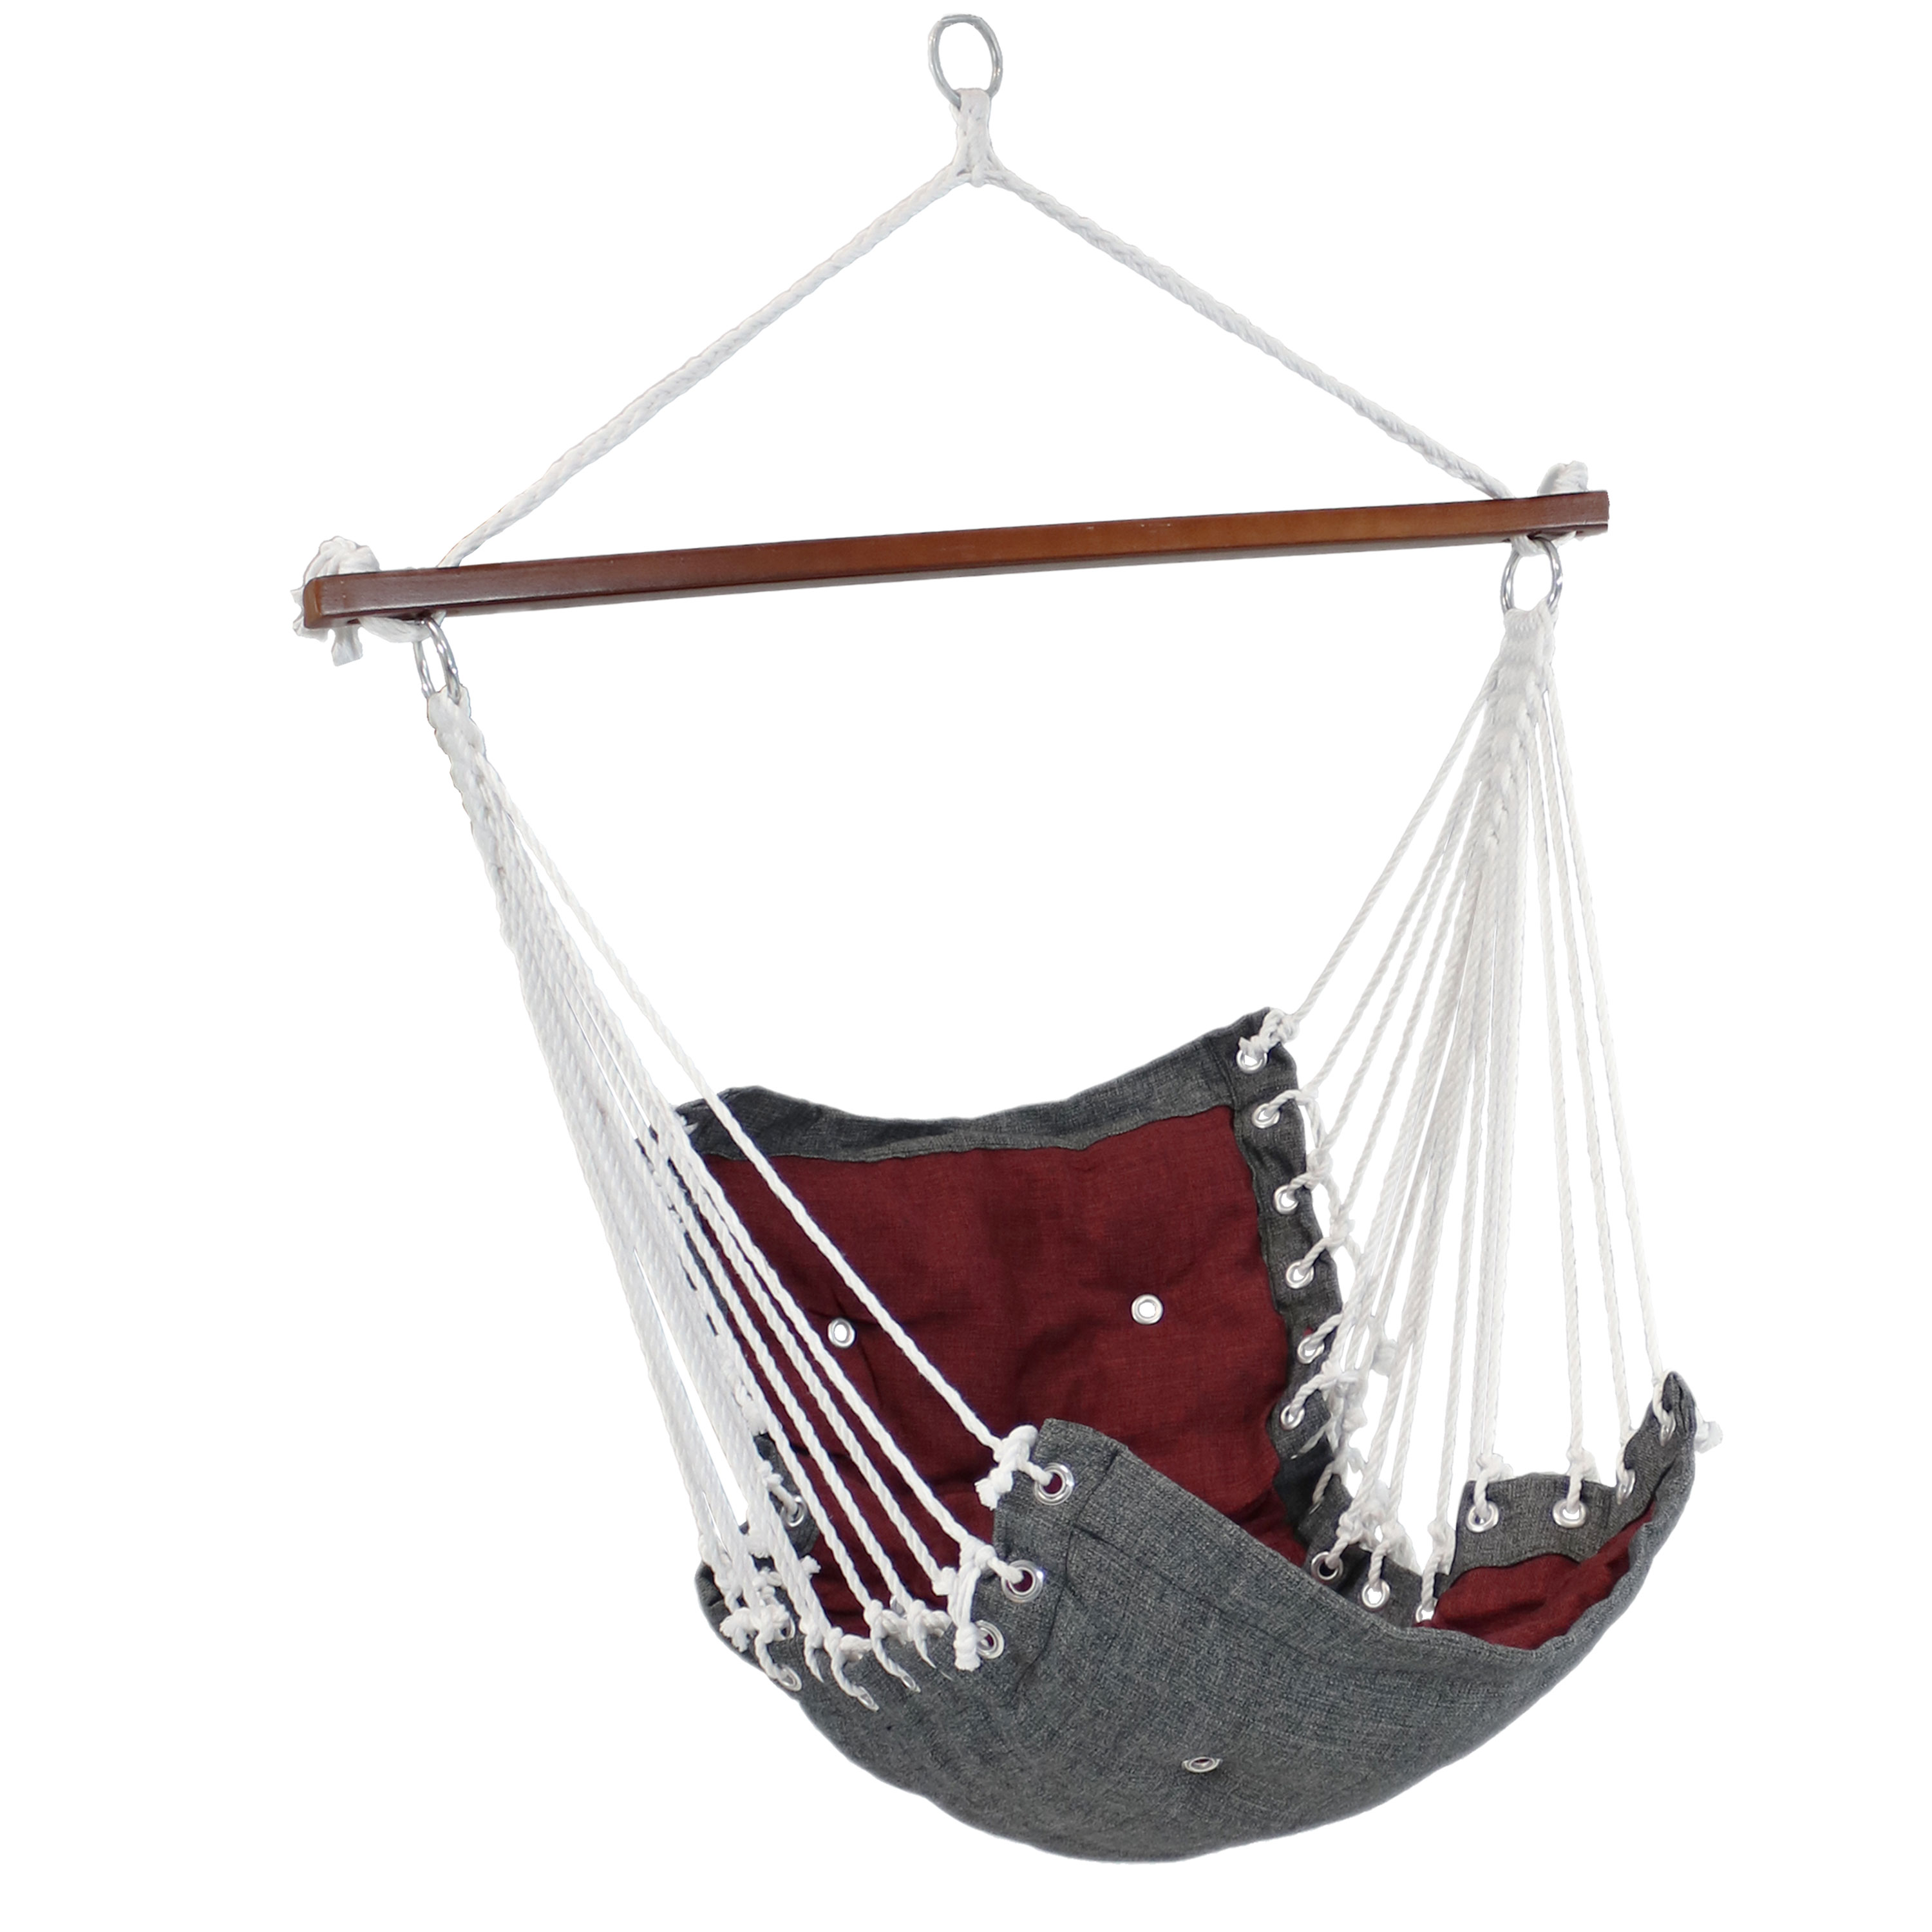 Sunnydaze Tufted Victorian Hammock Swing for Outdoor Use, 300-Pound Weight Capacity, Red